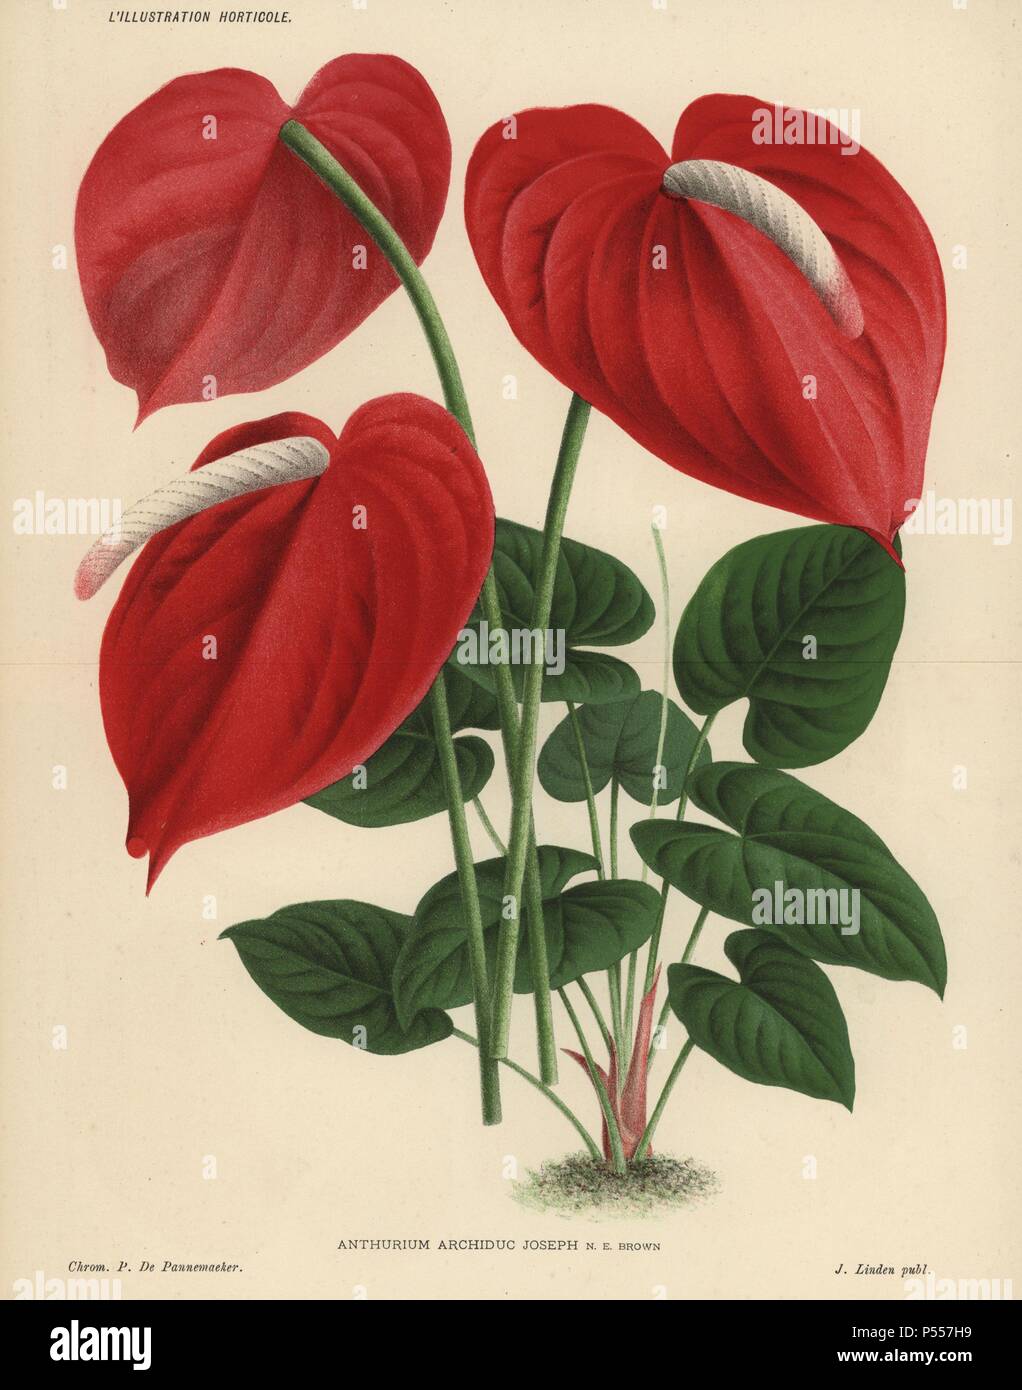 Scarlet flamingo flower or anthurium lily. Anthurium Archiduc Joseph N. E. Brown. Chromolithograph drawn by P. de Pannemaeker, for Jean Linden's 'L'Illustration Horticole' published in Ghent in 1886. Jean Linden (1817-1898) was a Belgian explorer, horticulturist, scientist and publisher of botanical books. Stock Photo